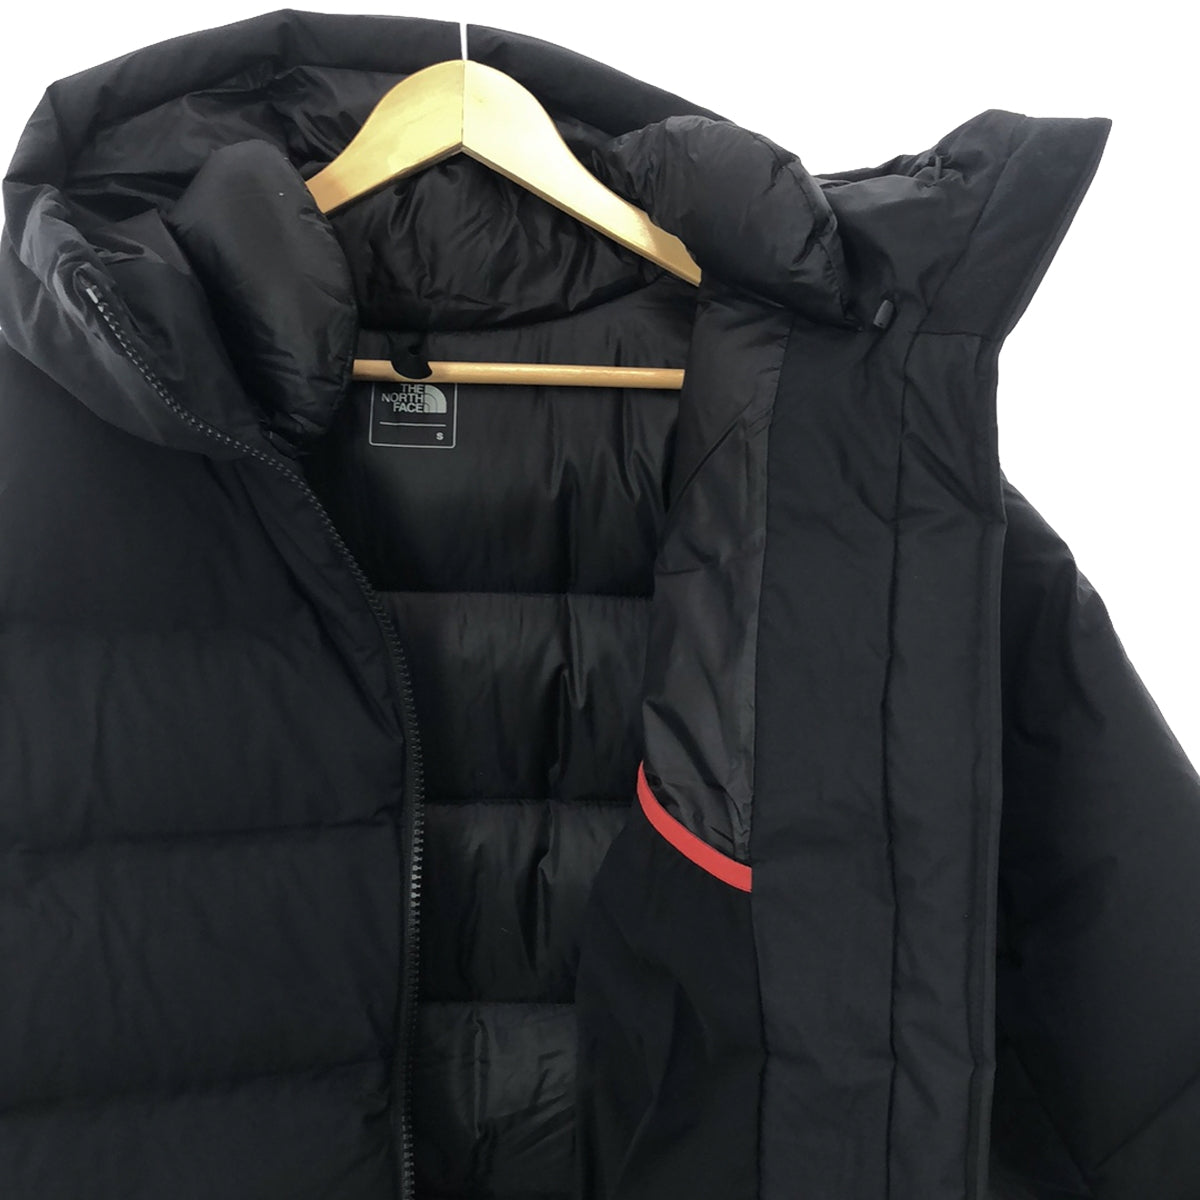 THE NORTH FACE / ザノースフェイス | Belayer Parka GORE-TEX